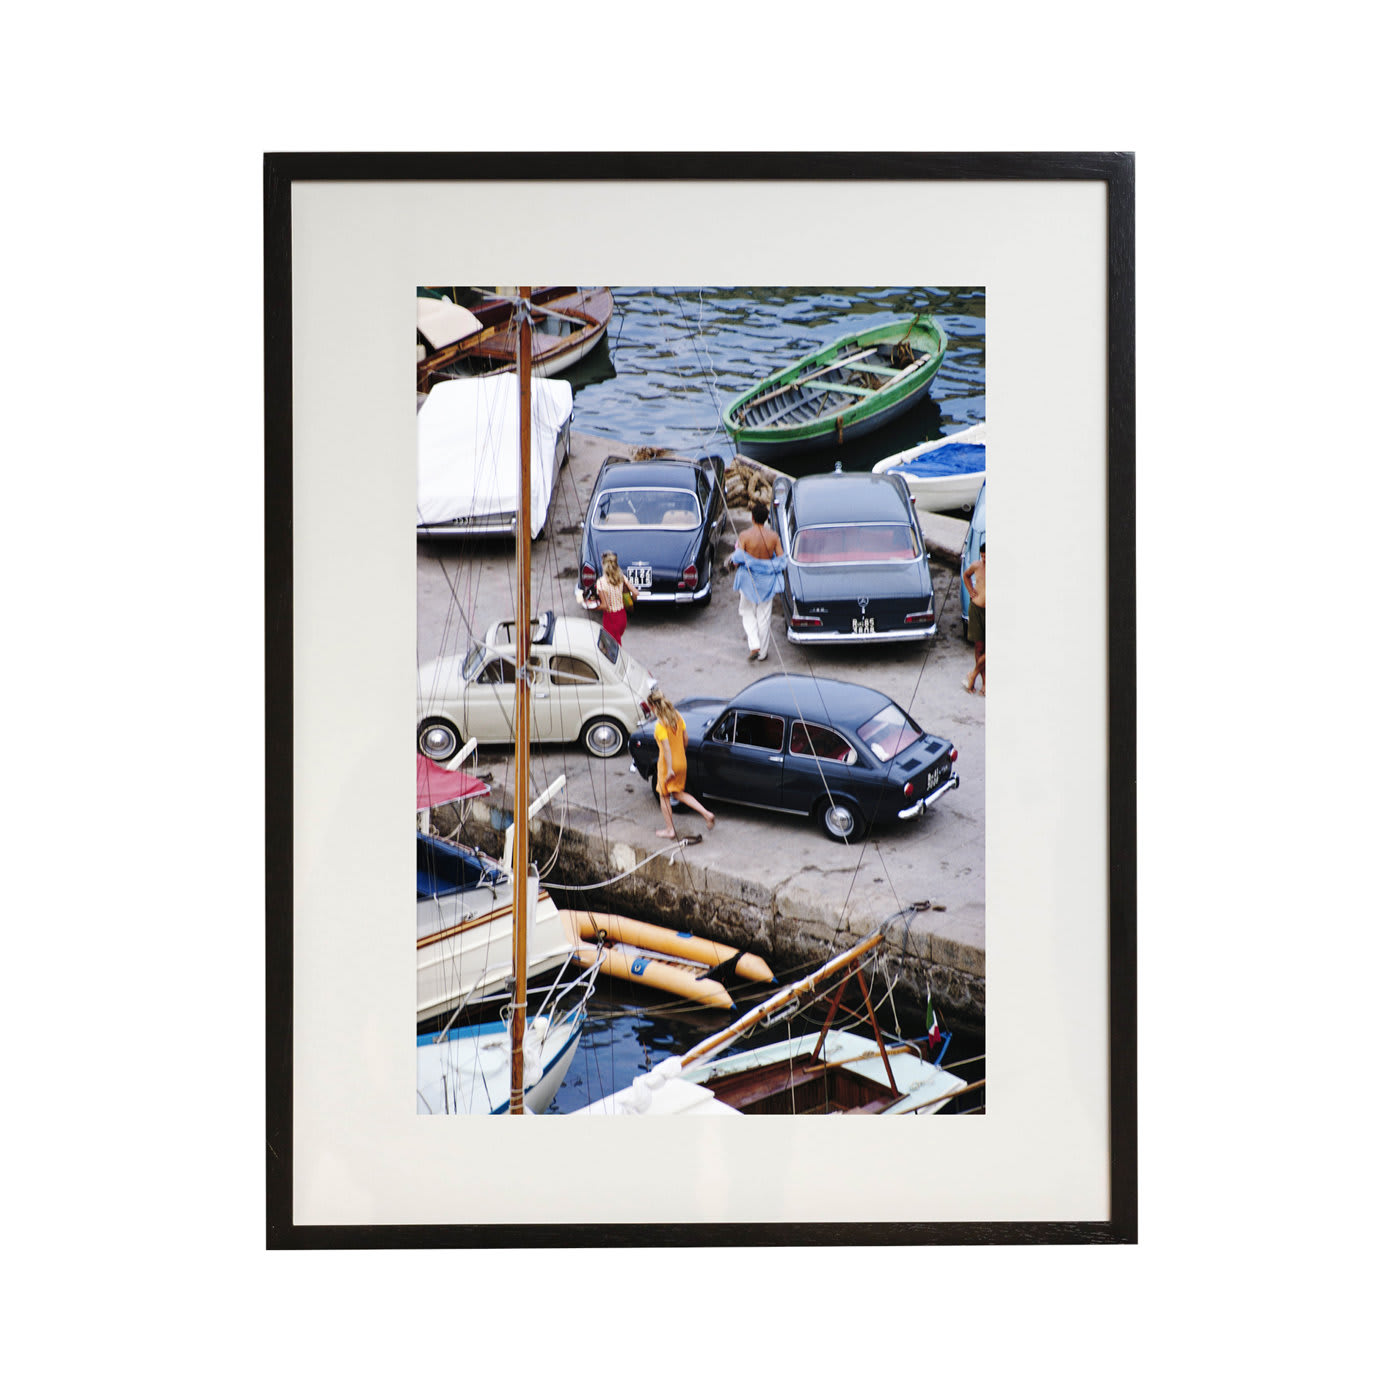 Porto Ercole Harbour Framed Print by Slim Aarons - Getty Images